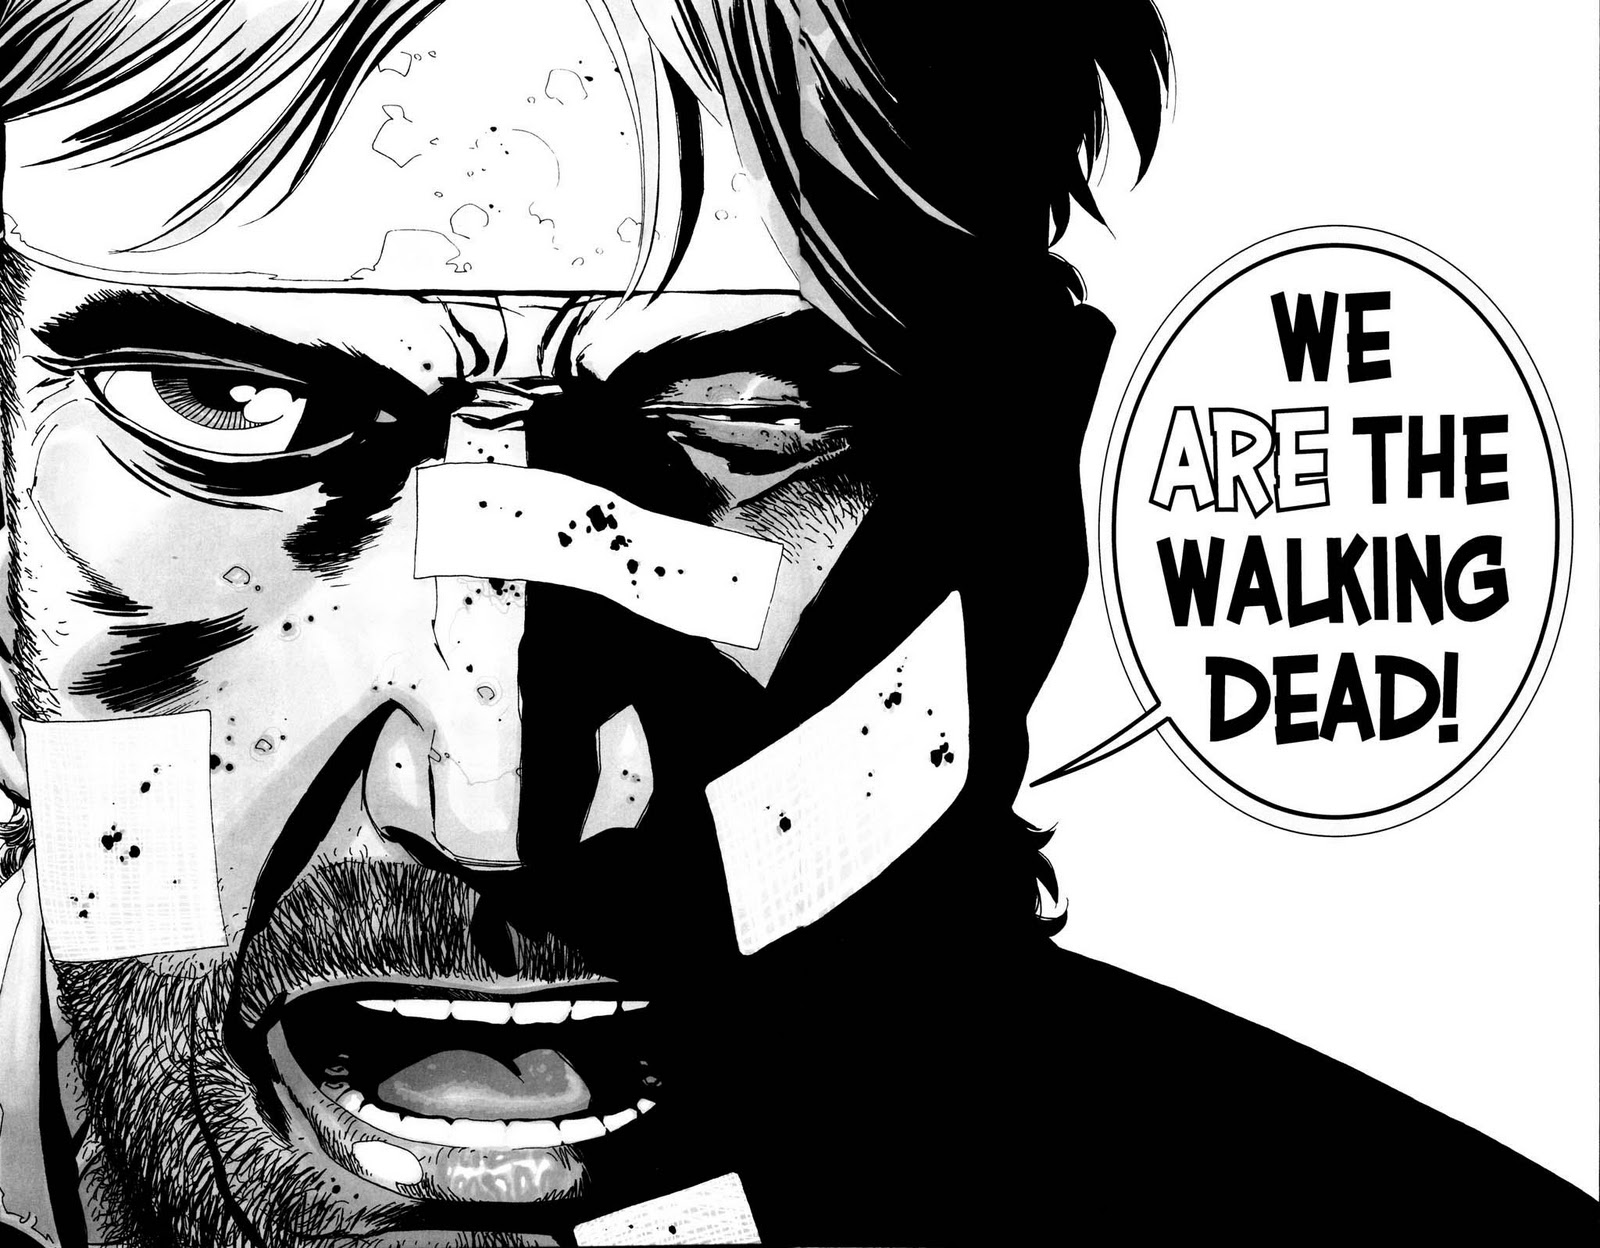 We-are-the-walking-dead-Rick-Grimes-said.jpg